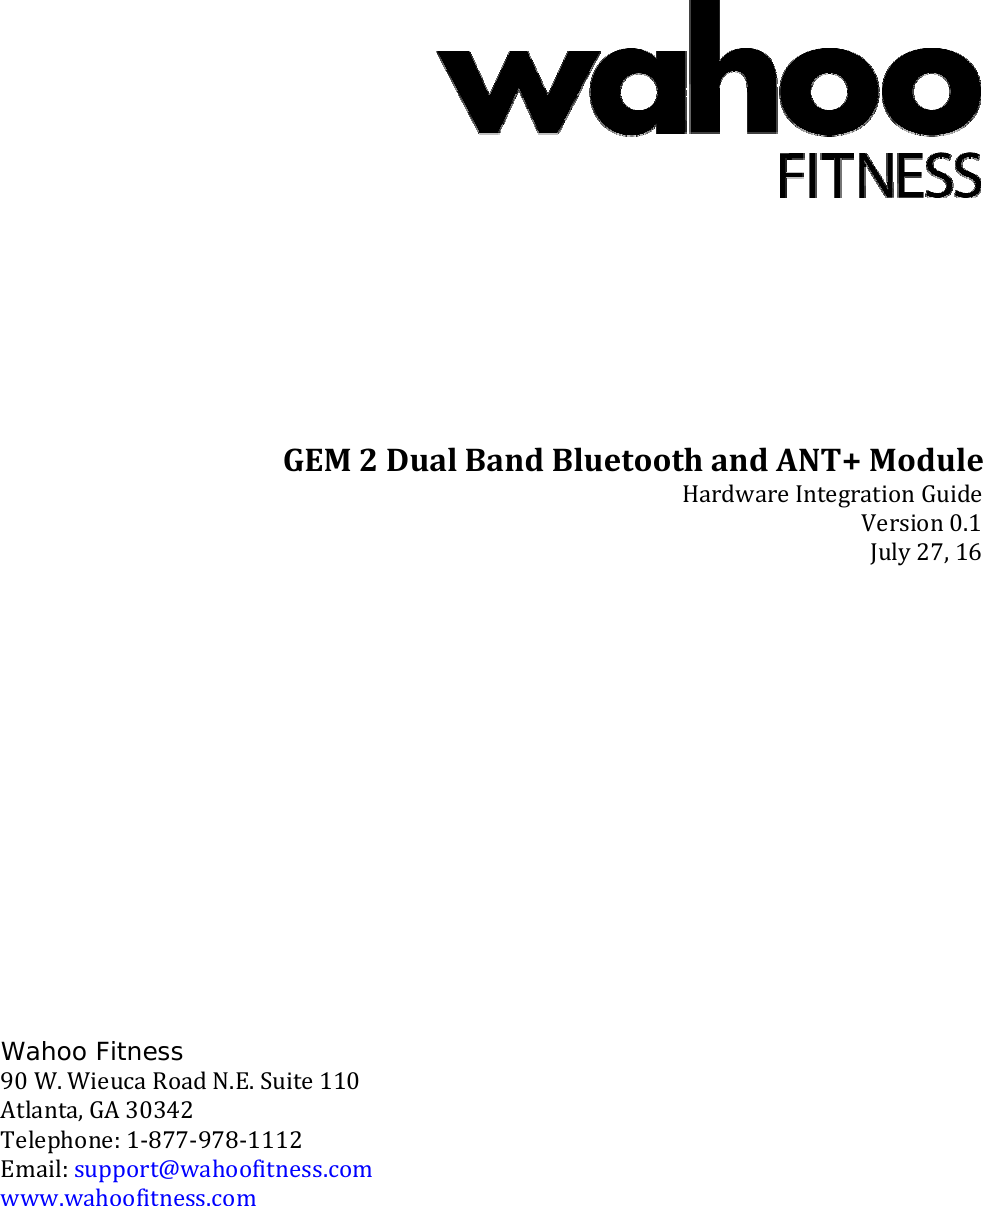 GEM 2 Dual Band Bluetooth and ANT+ ModuleHardware Integration GuideVersion 0.1July 27, 16Wahoo Fitness90 W. Wieuca Road N.E. Suite 110Atlanta, GA 30342Telephone: 1‐877‐978‐1112Email: support@wahoofitness.comwww.wahoofitness.com